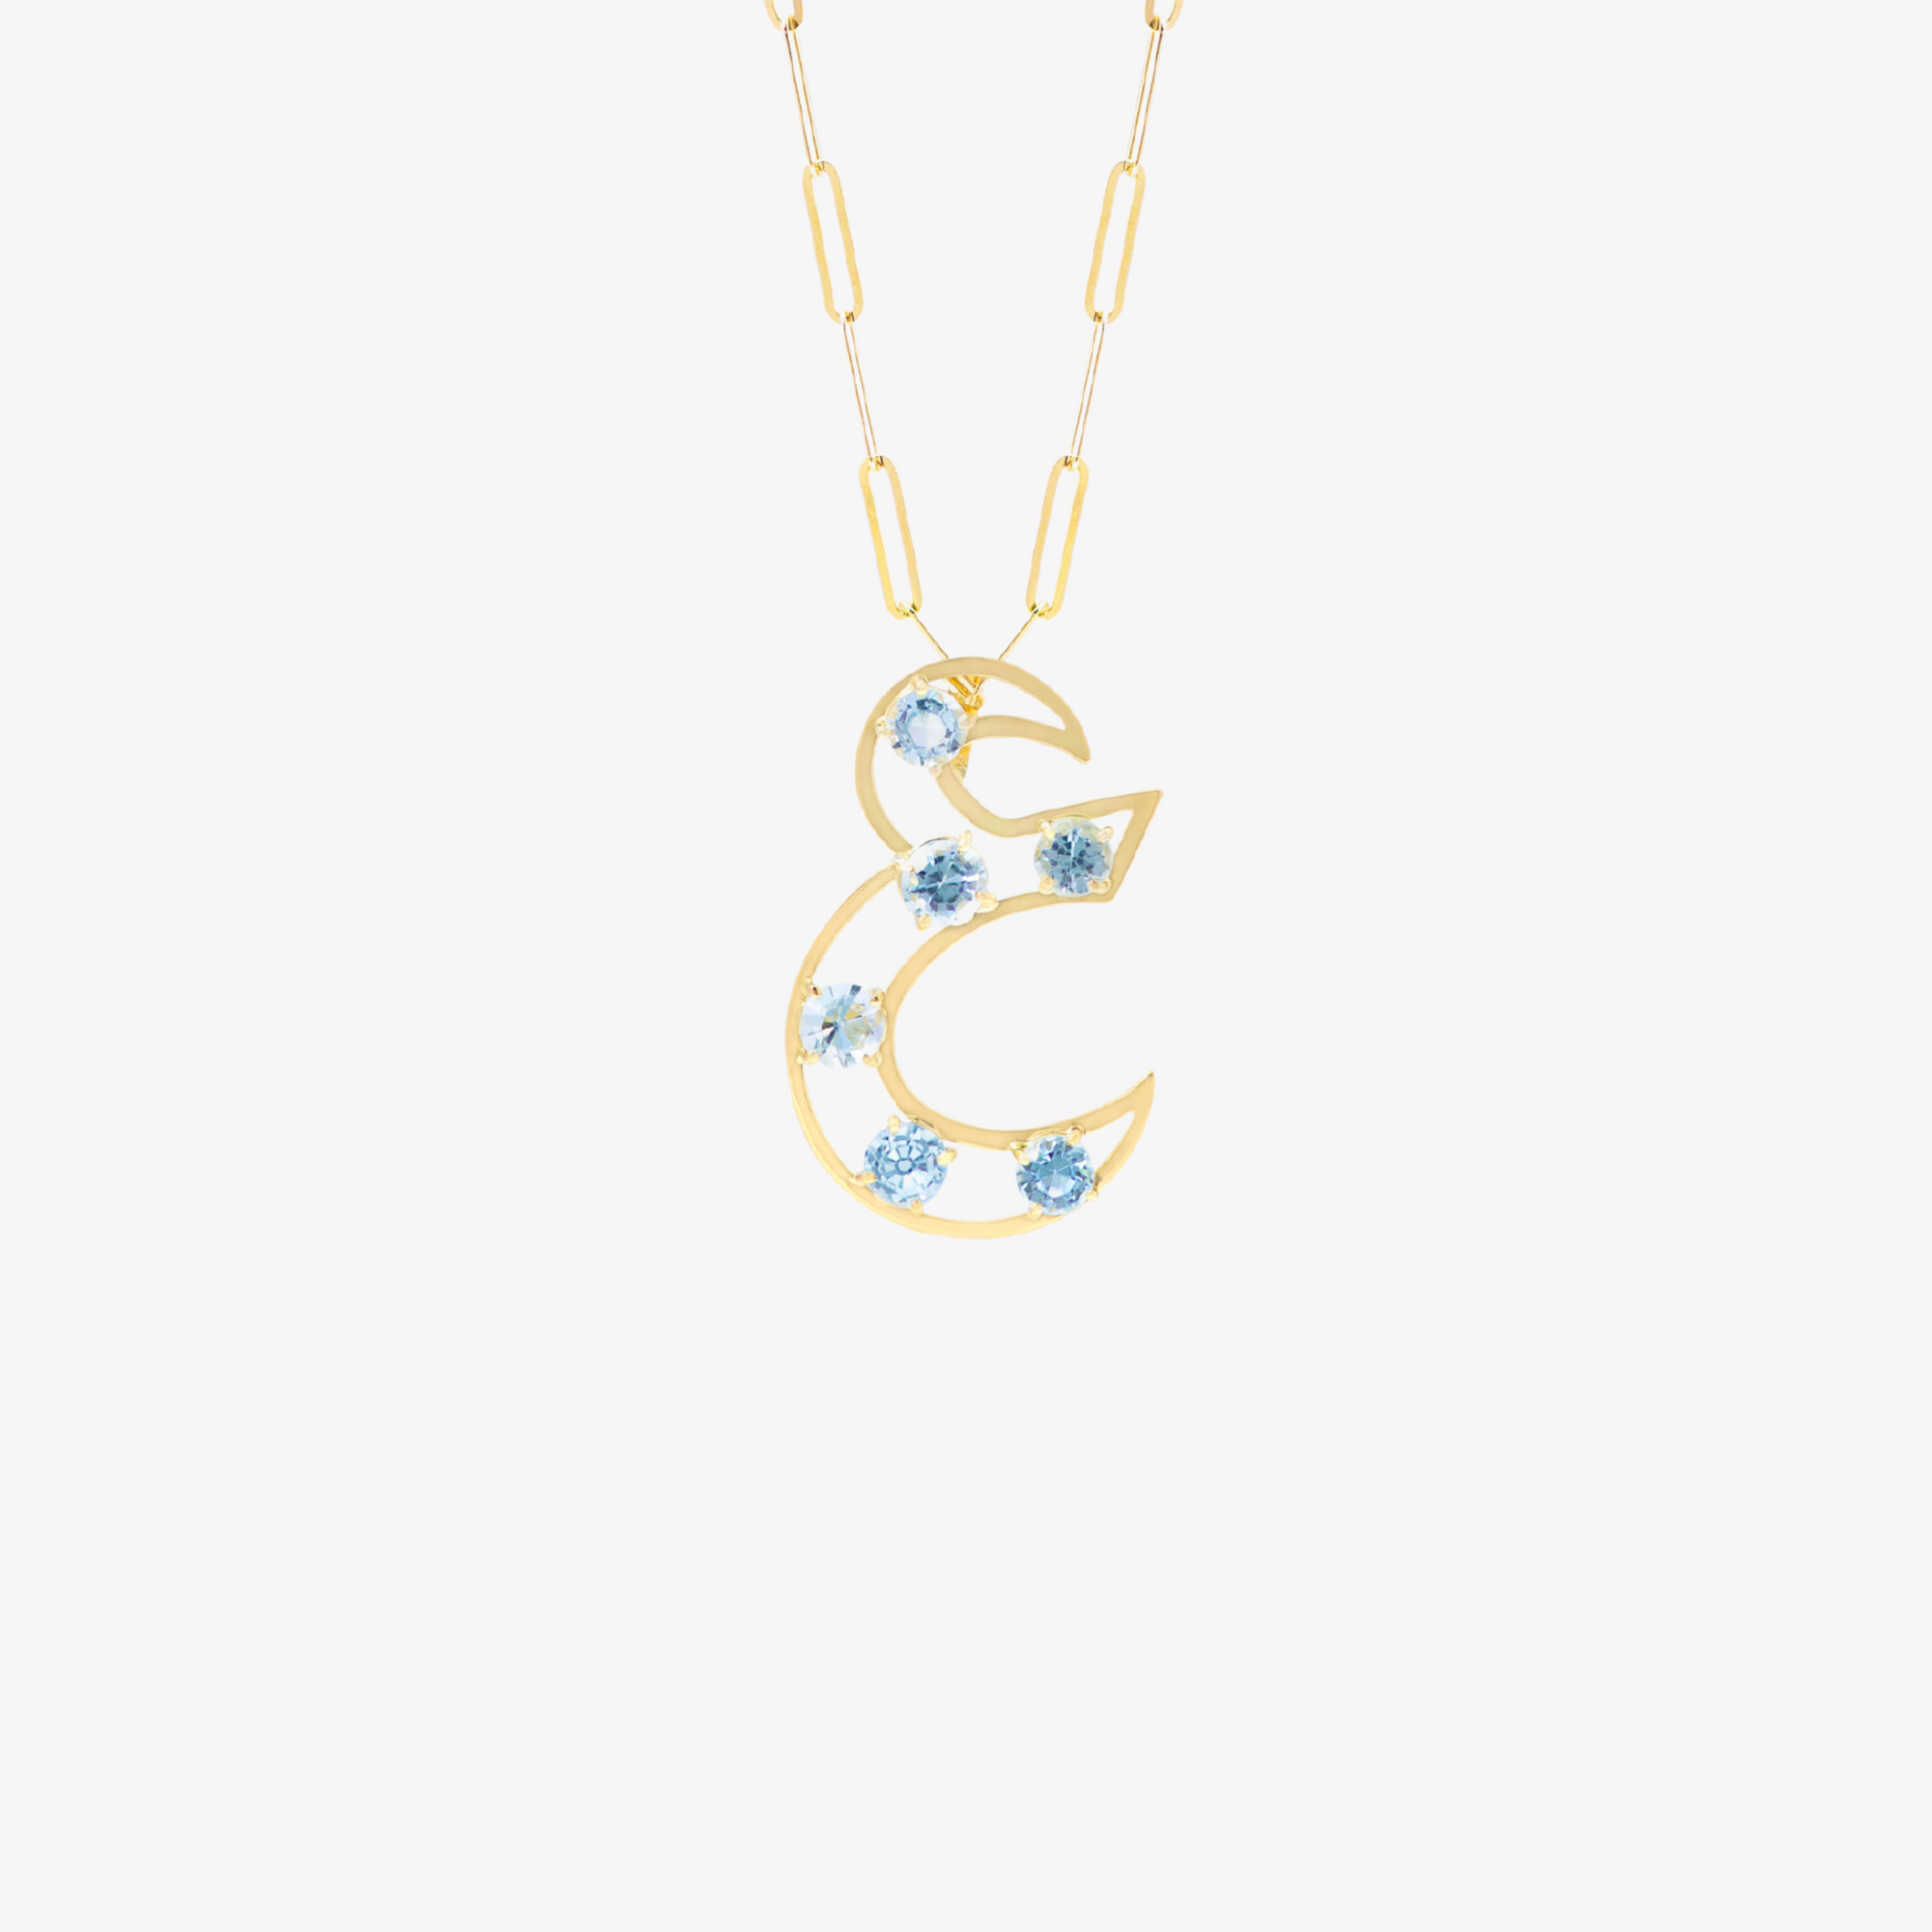 OULA - Gold Frame Necklace with Topaz Stone